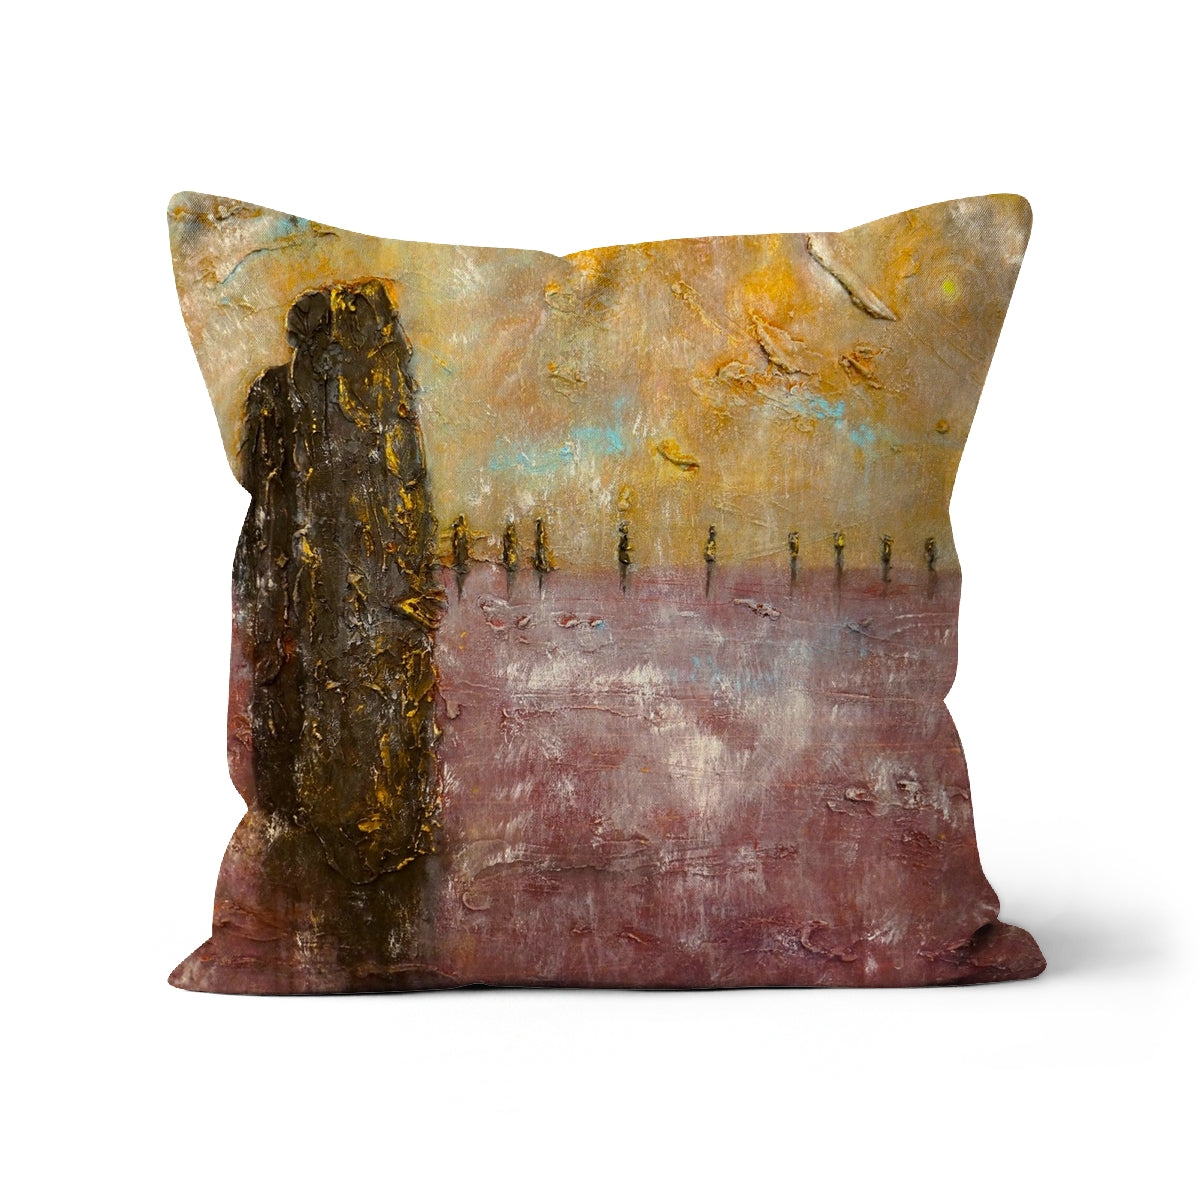 Brodgar Mist Orkney Art Gifts Cushion-Cushions-Orkney Art Gallery-Linen-16"x16"-Paintings, Prints, Homeware, Art Gifts From Scotland By Scottish Artist Kevin Hunter